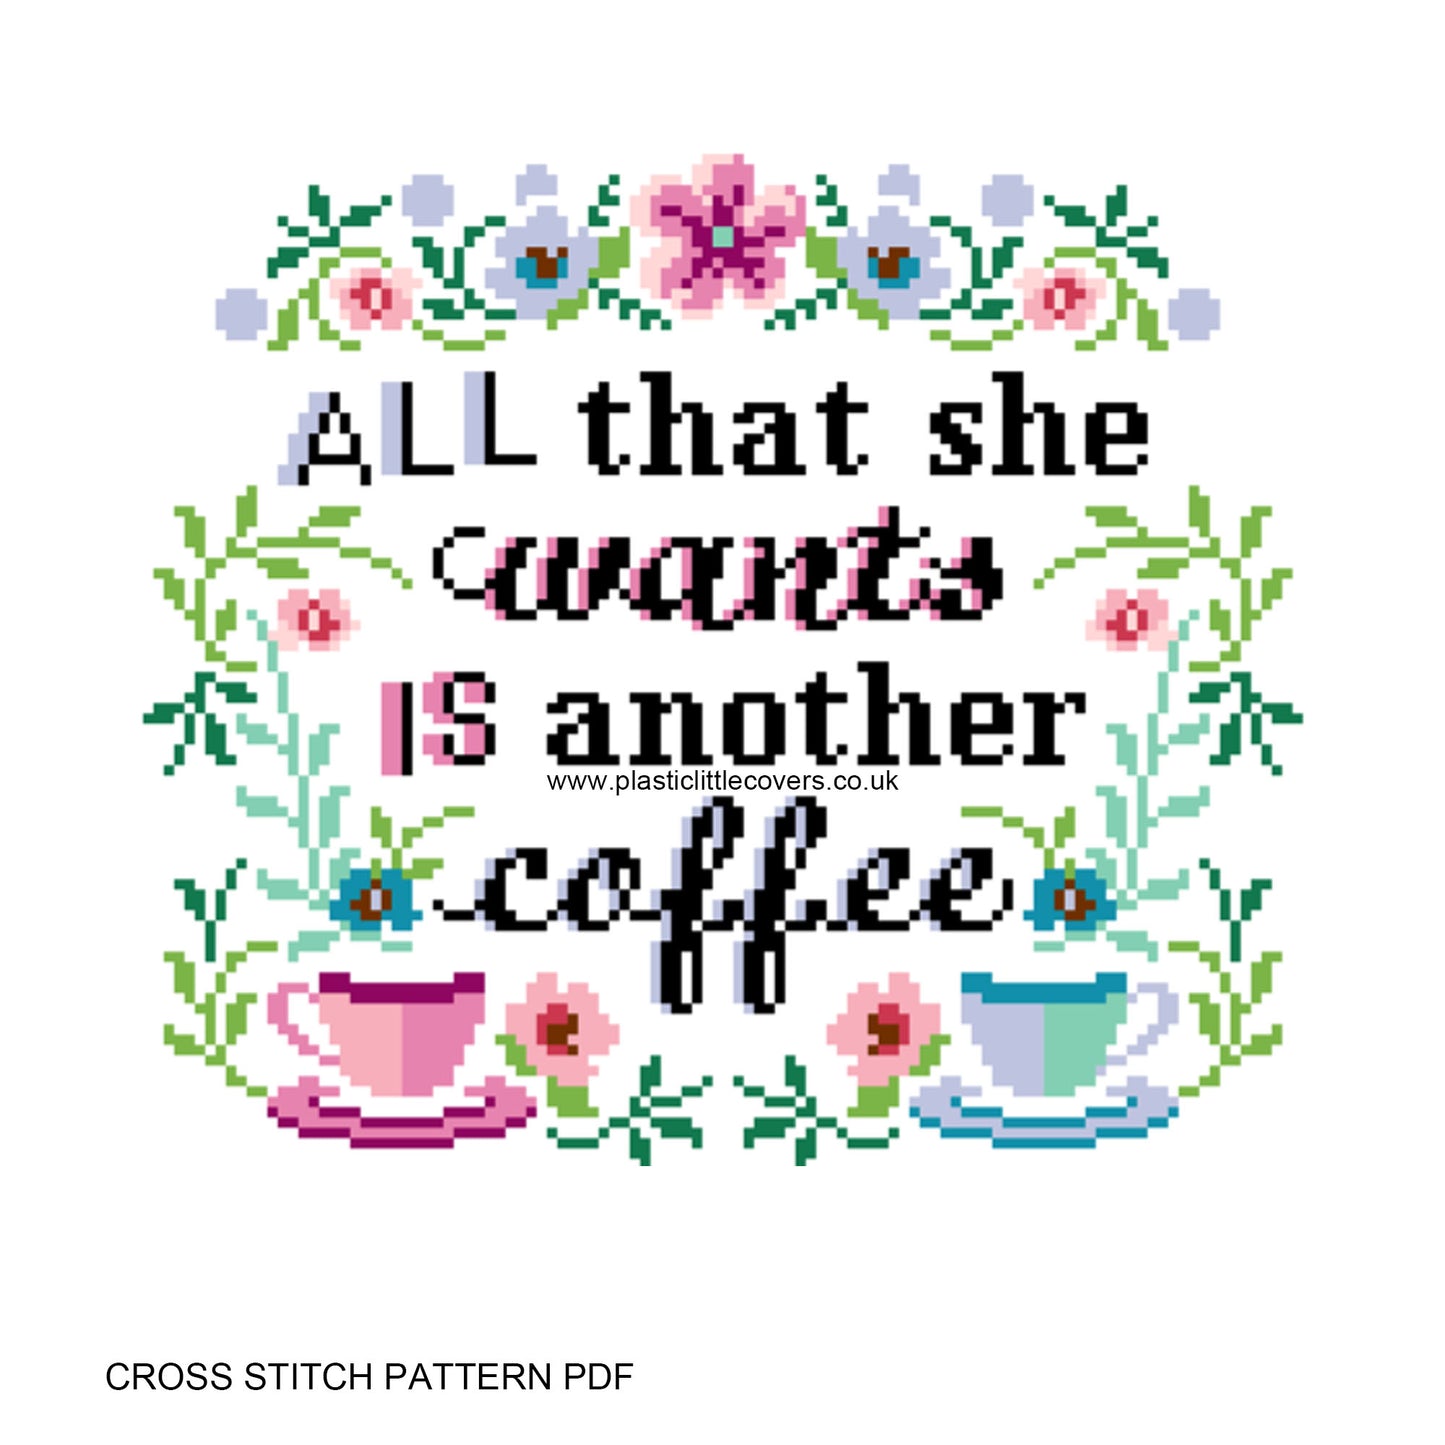 All That She Wants Is Another Coffee - Cross Stitch Pattern PDF.